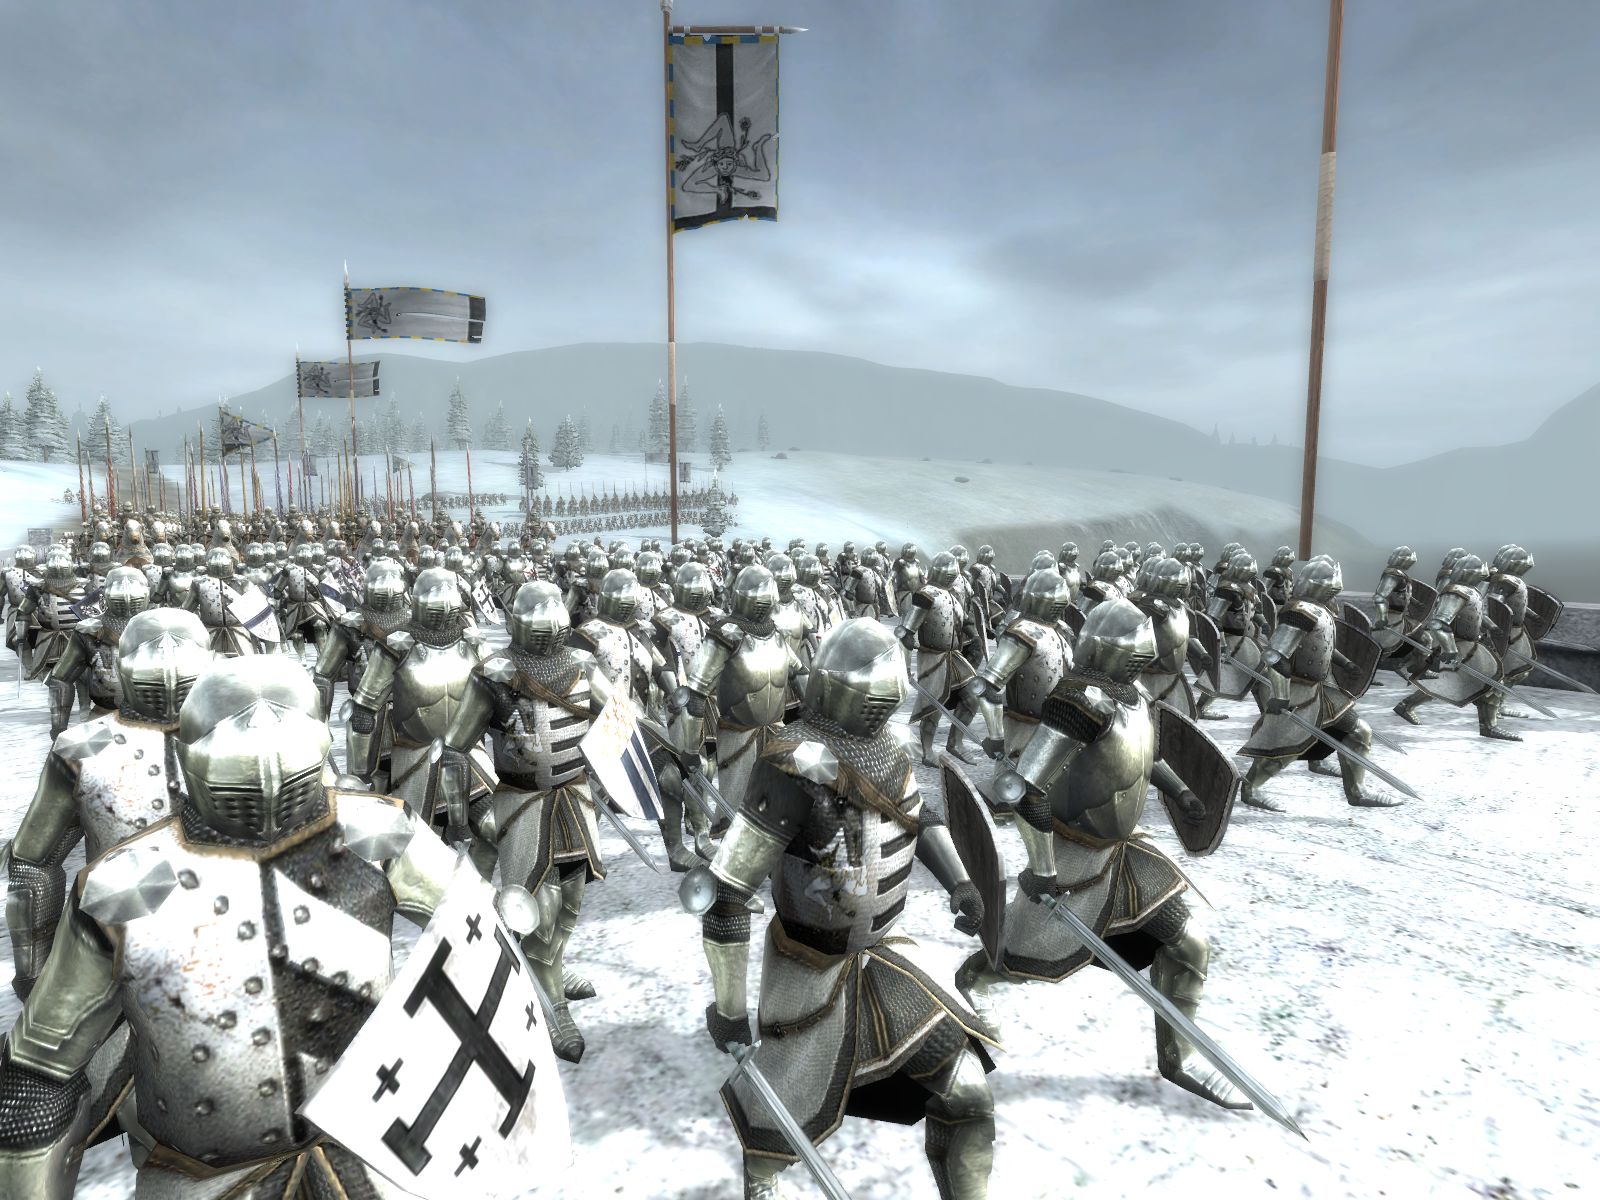 Sorry, but total war games are usually known to cover the screen with this stuff.